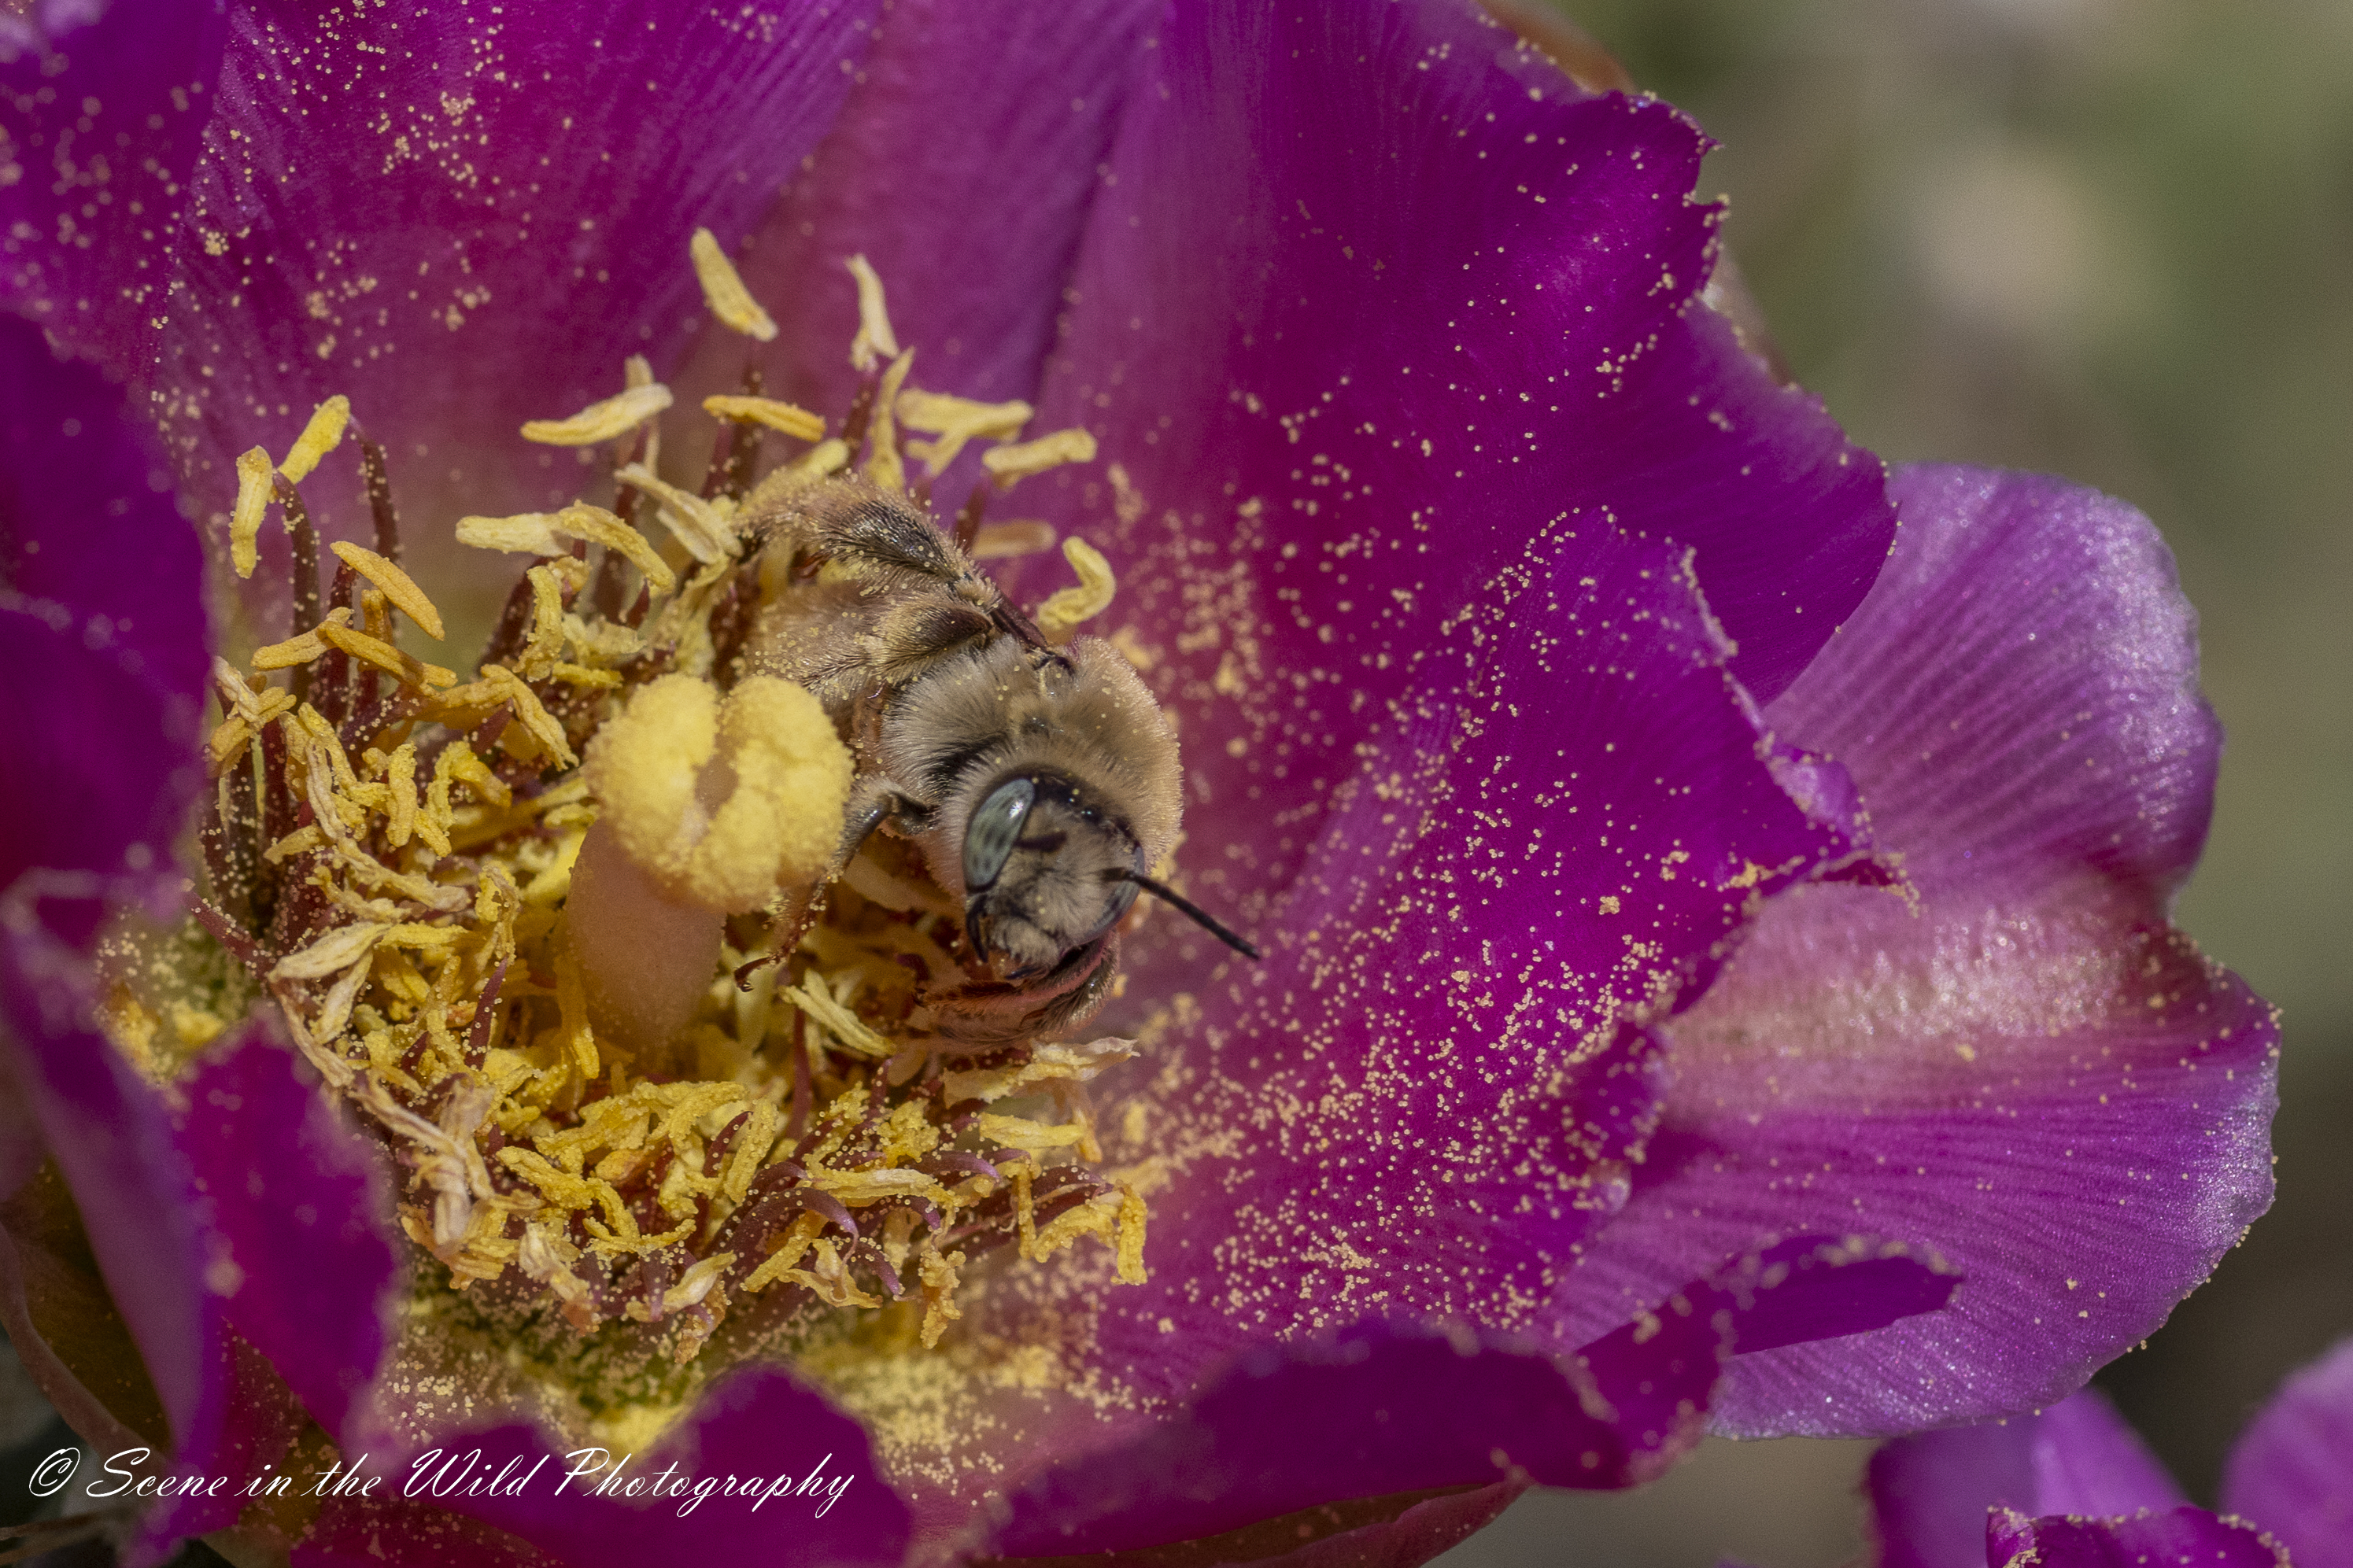 This bee is close to the flower's pistil, and about to leave to go pollinate another flower. If you go out to Comanche Grassland, you'll notice lots of pollinators around the cholla flowers.